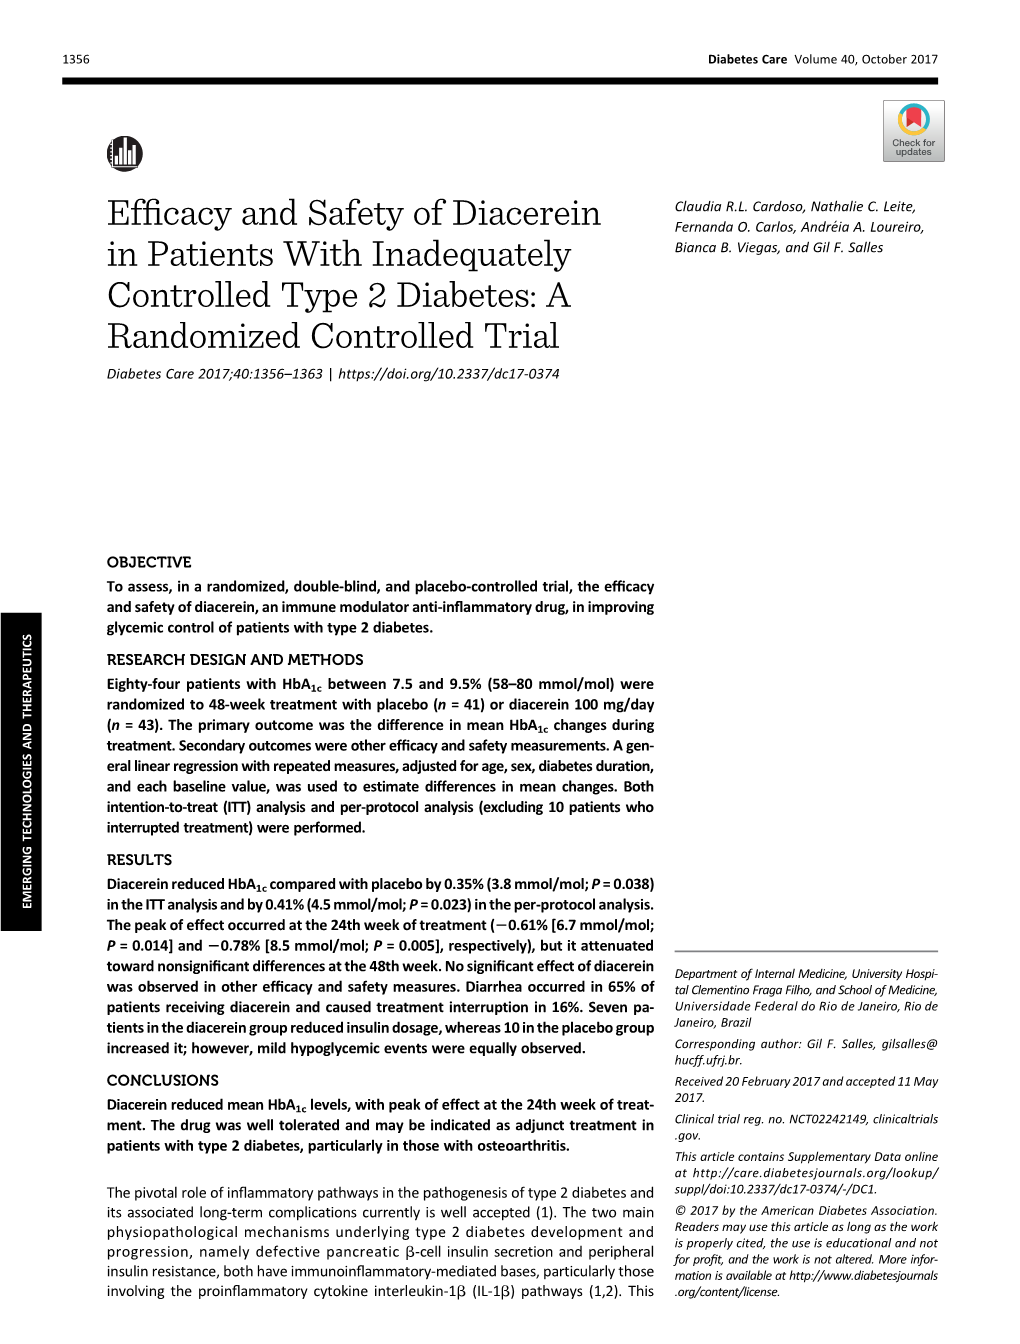 Efficacy and Safety of Diacerein in Patients with Inadequately